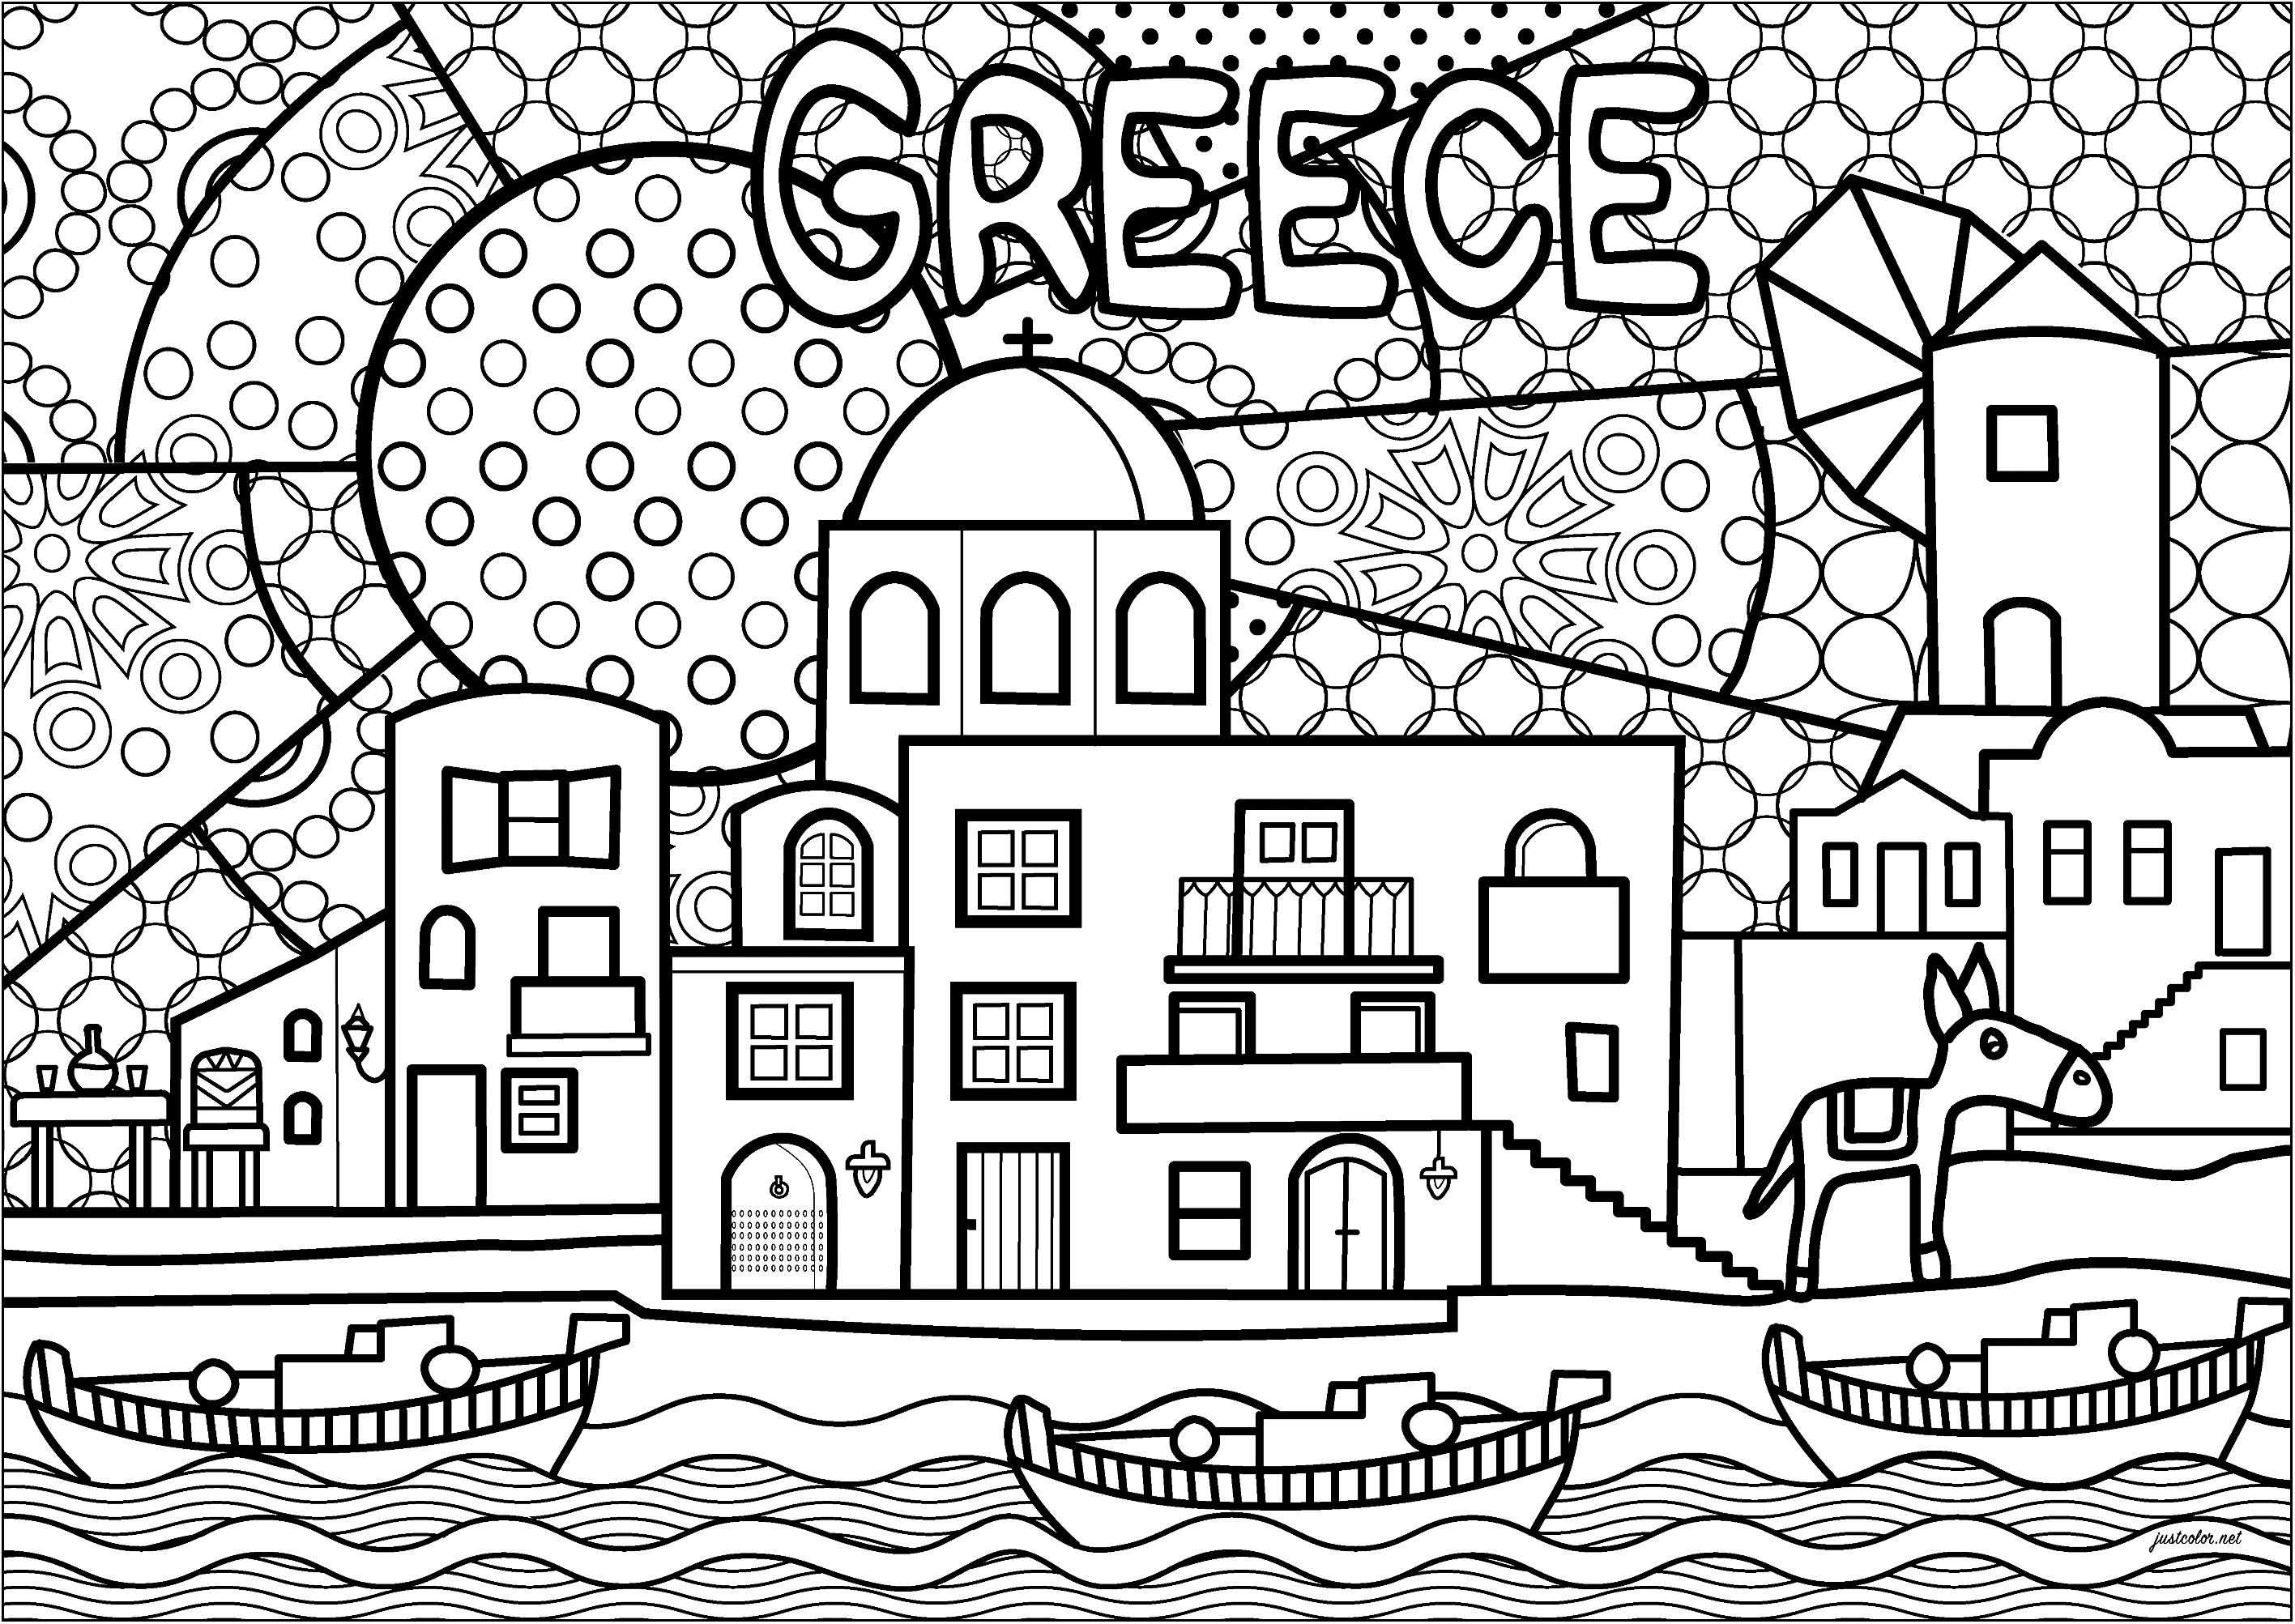 Pretty Greek village with typical architecture. This original coloring book features a mill, village houses, a donkey and boats emerging from the harbor.The background features unique coloring motifs, Artist : Morgan